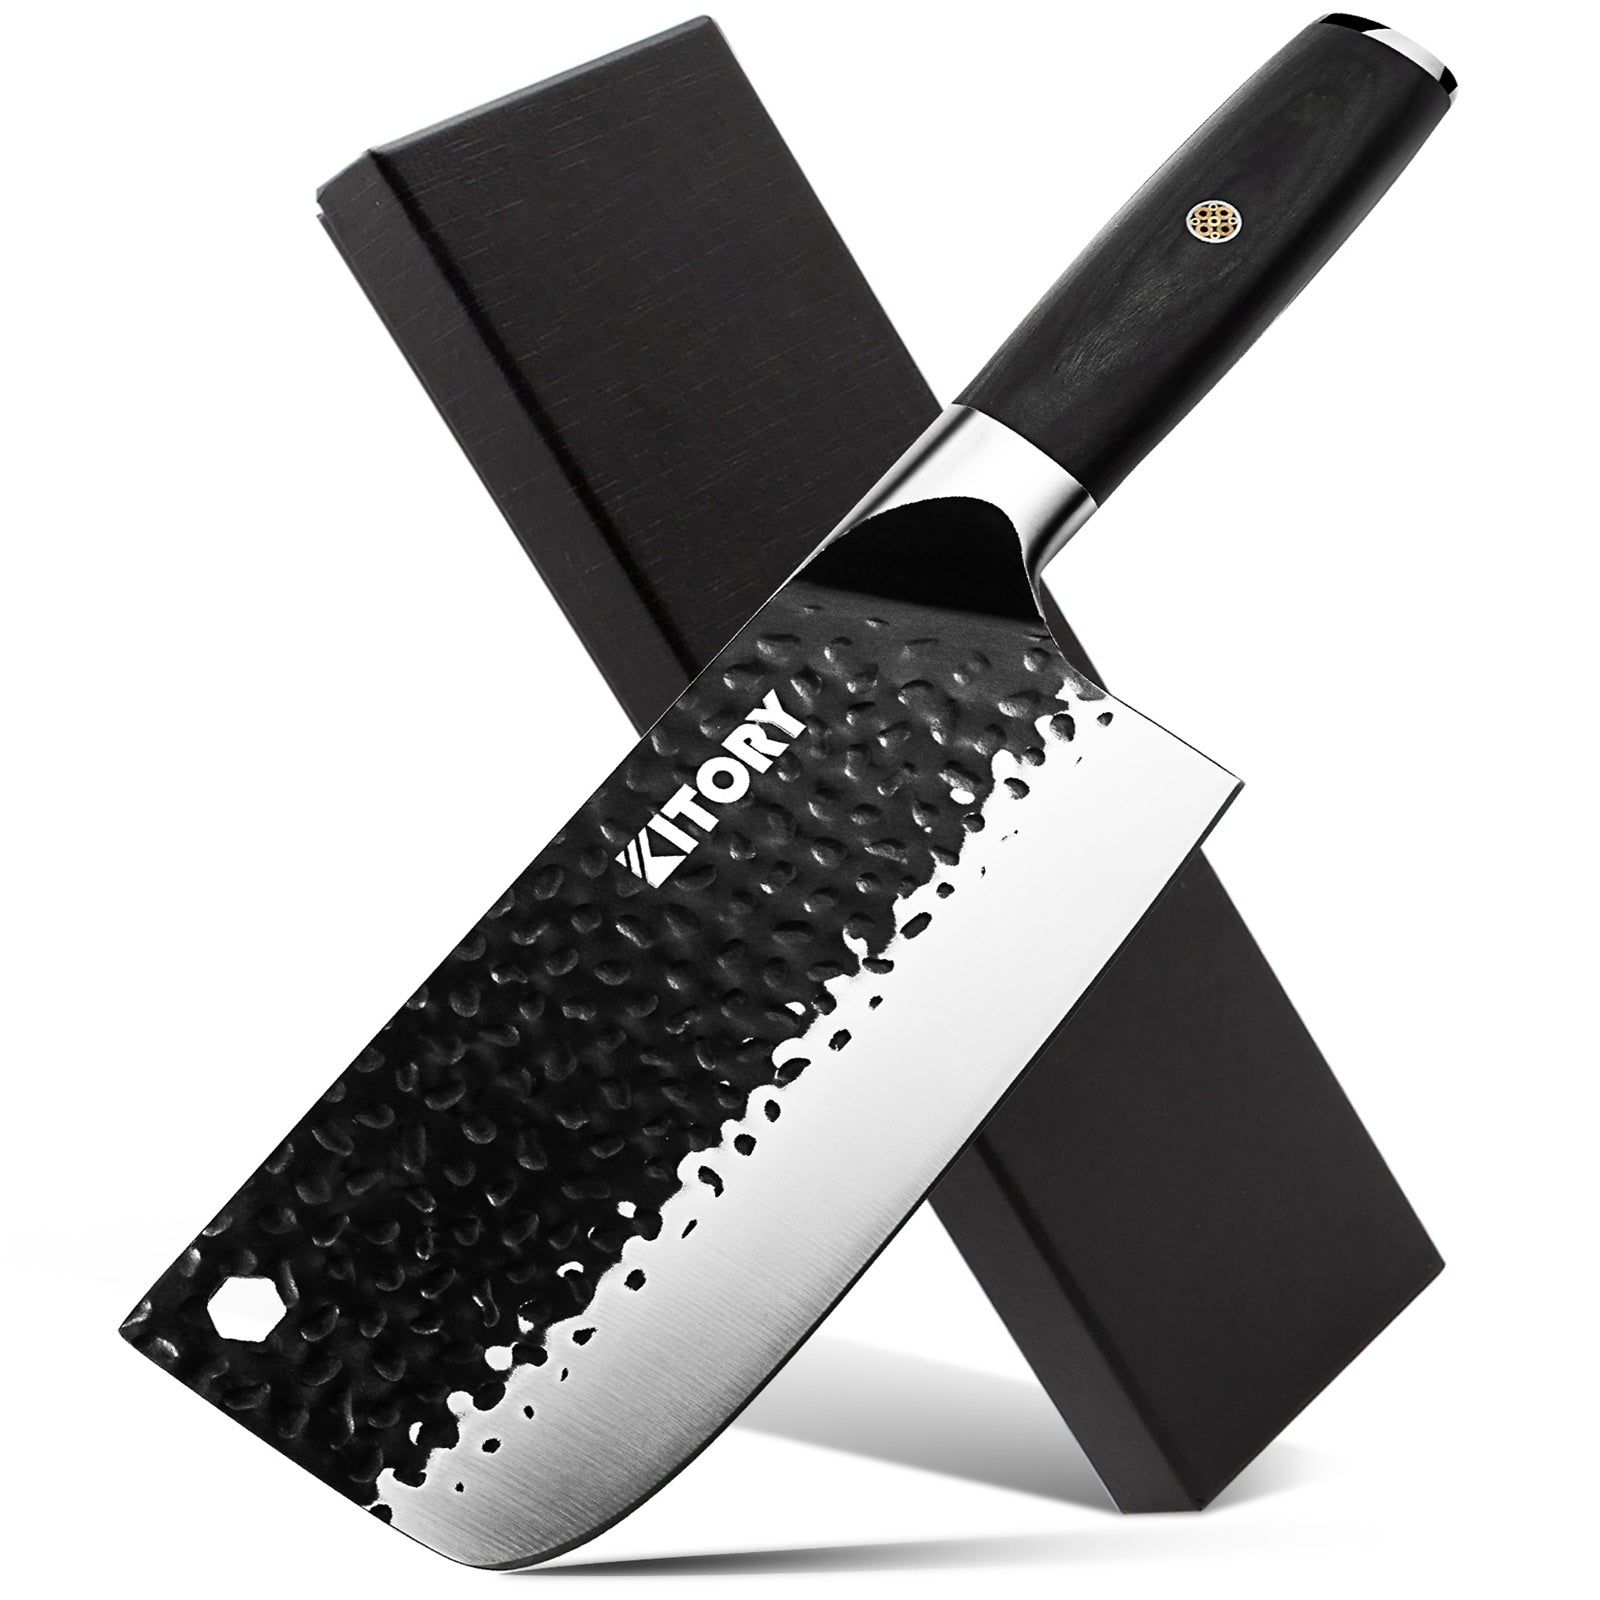 KOTAI Cleaver (Chinese Chef's Knife) - Pakka Collection - 190 mm blade